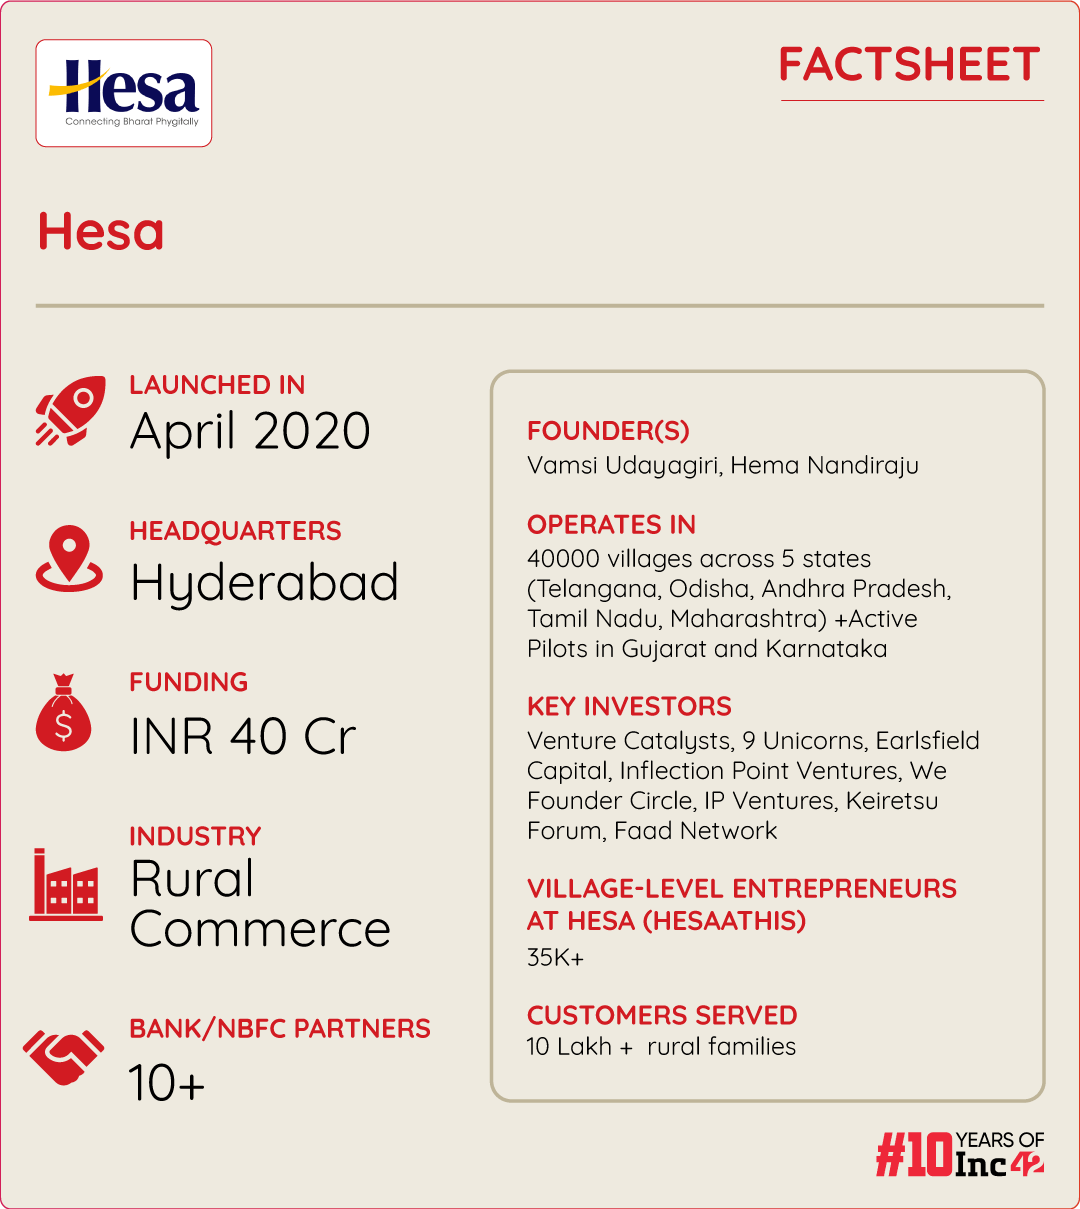 How Hesa Is Transforming Rural Commerce, Catering To Village Entrepreneurs And 10 Lakh+ Aspirational Families 